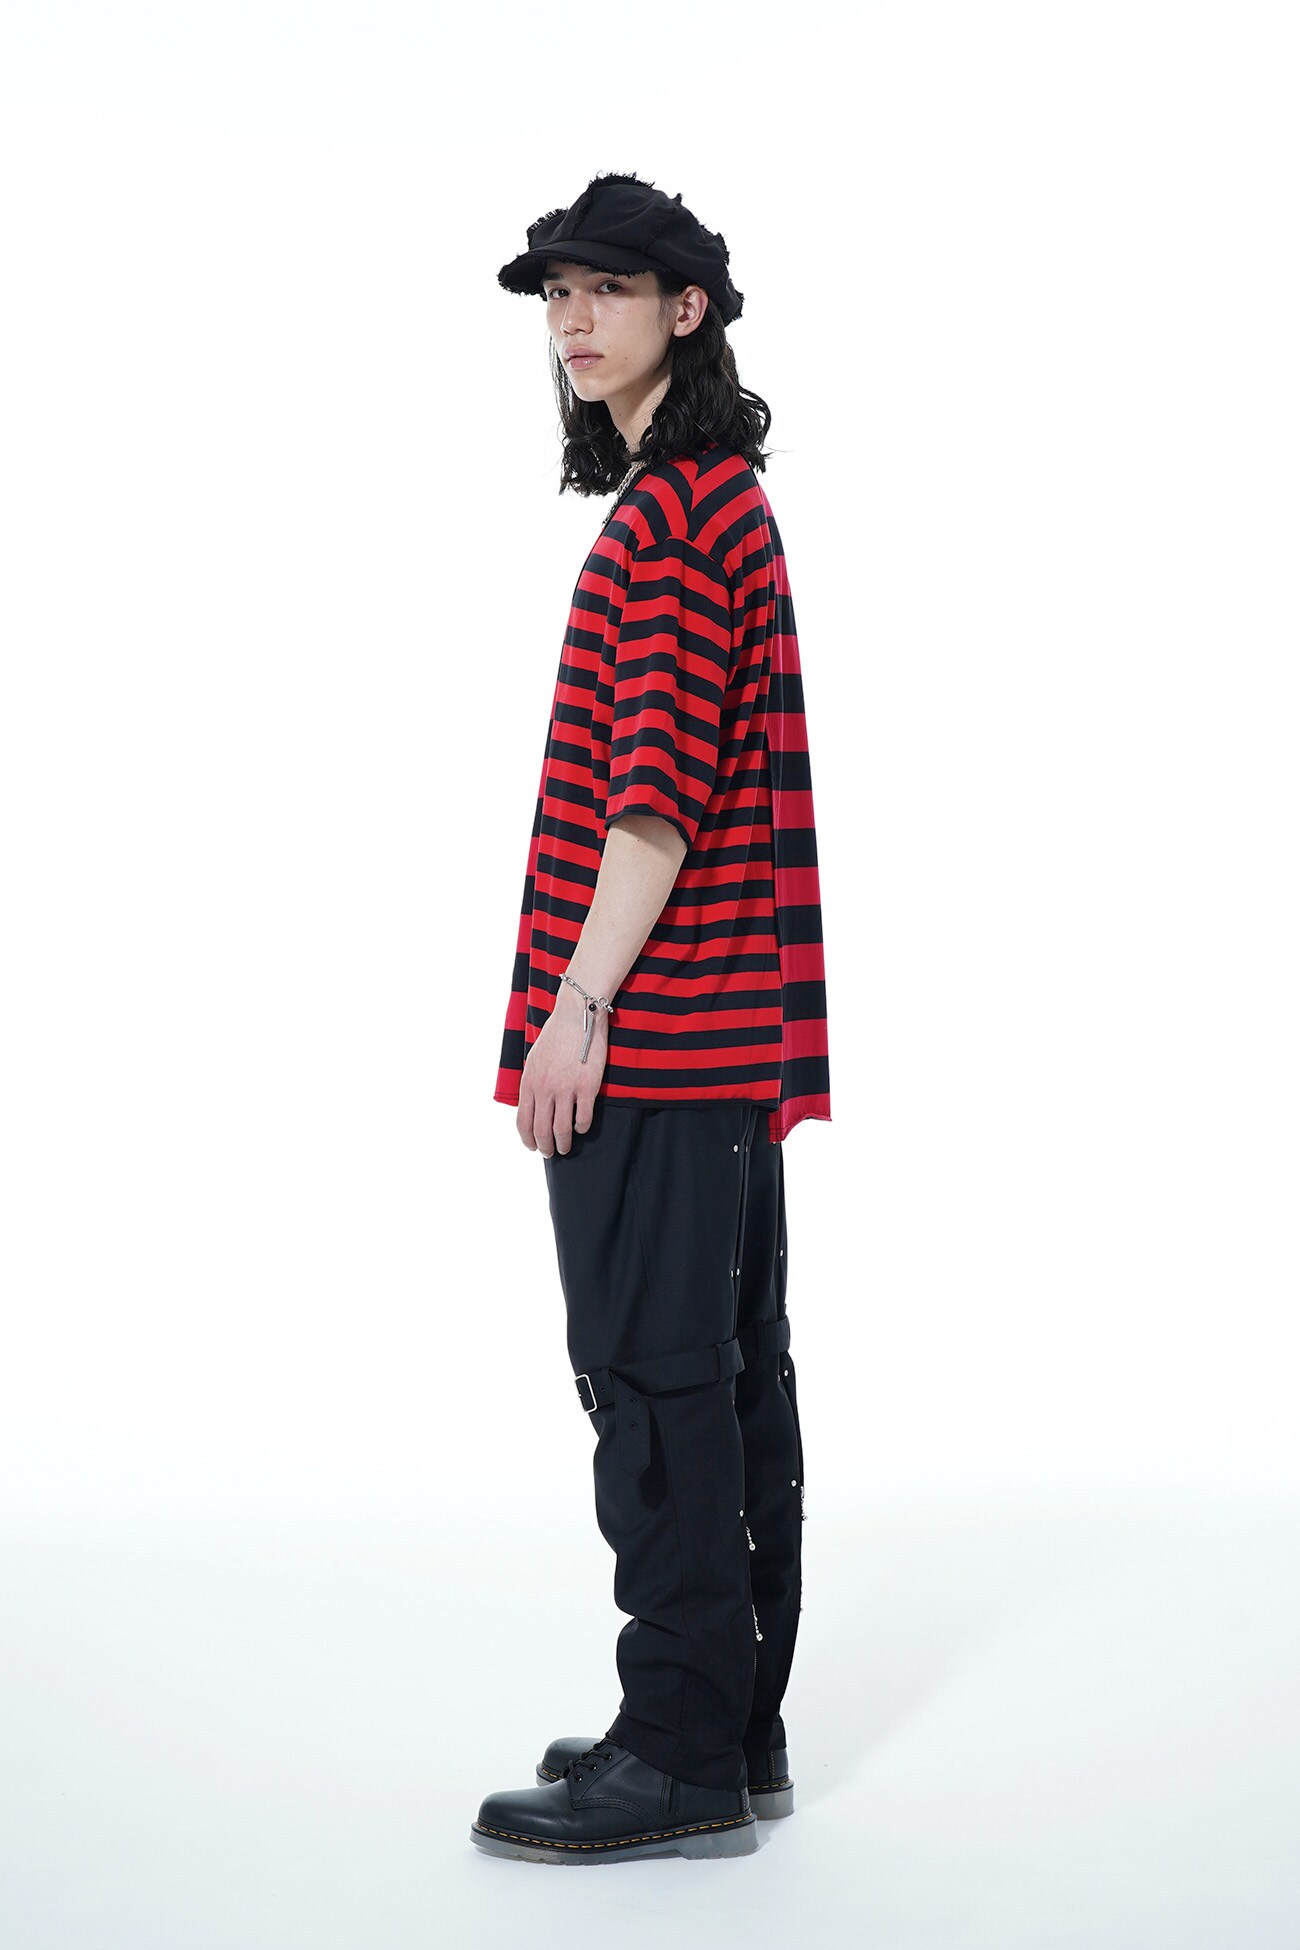 STAGGERED HORIZONTAL STRIPES ASYMMETRY T-SHIRTS